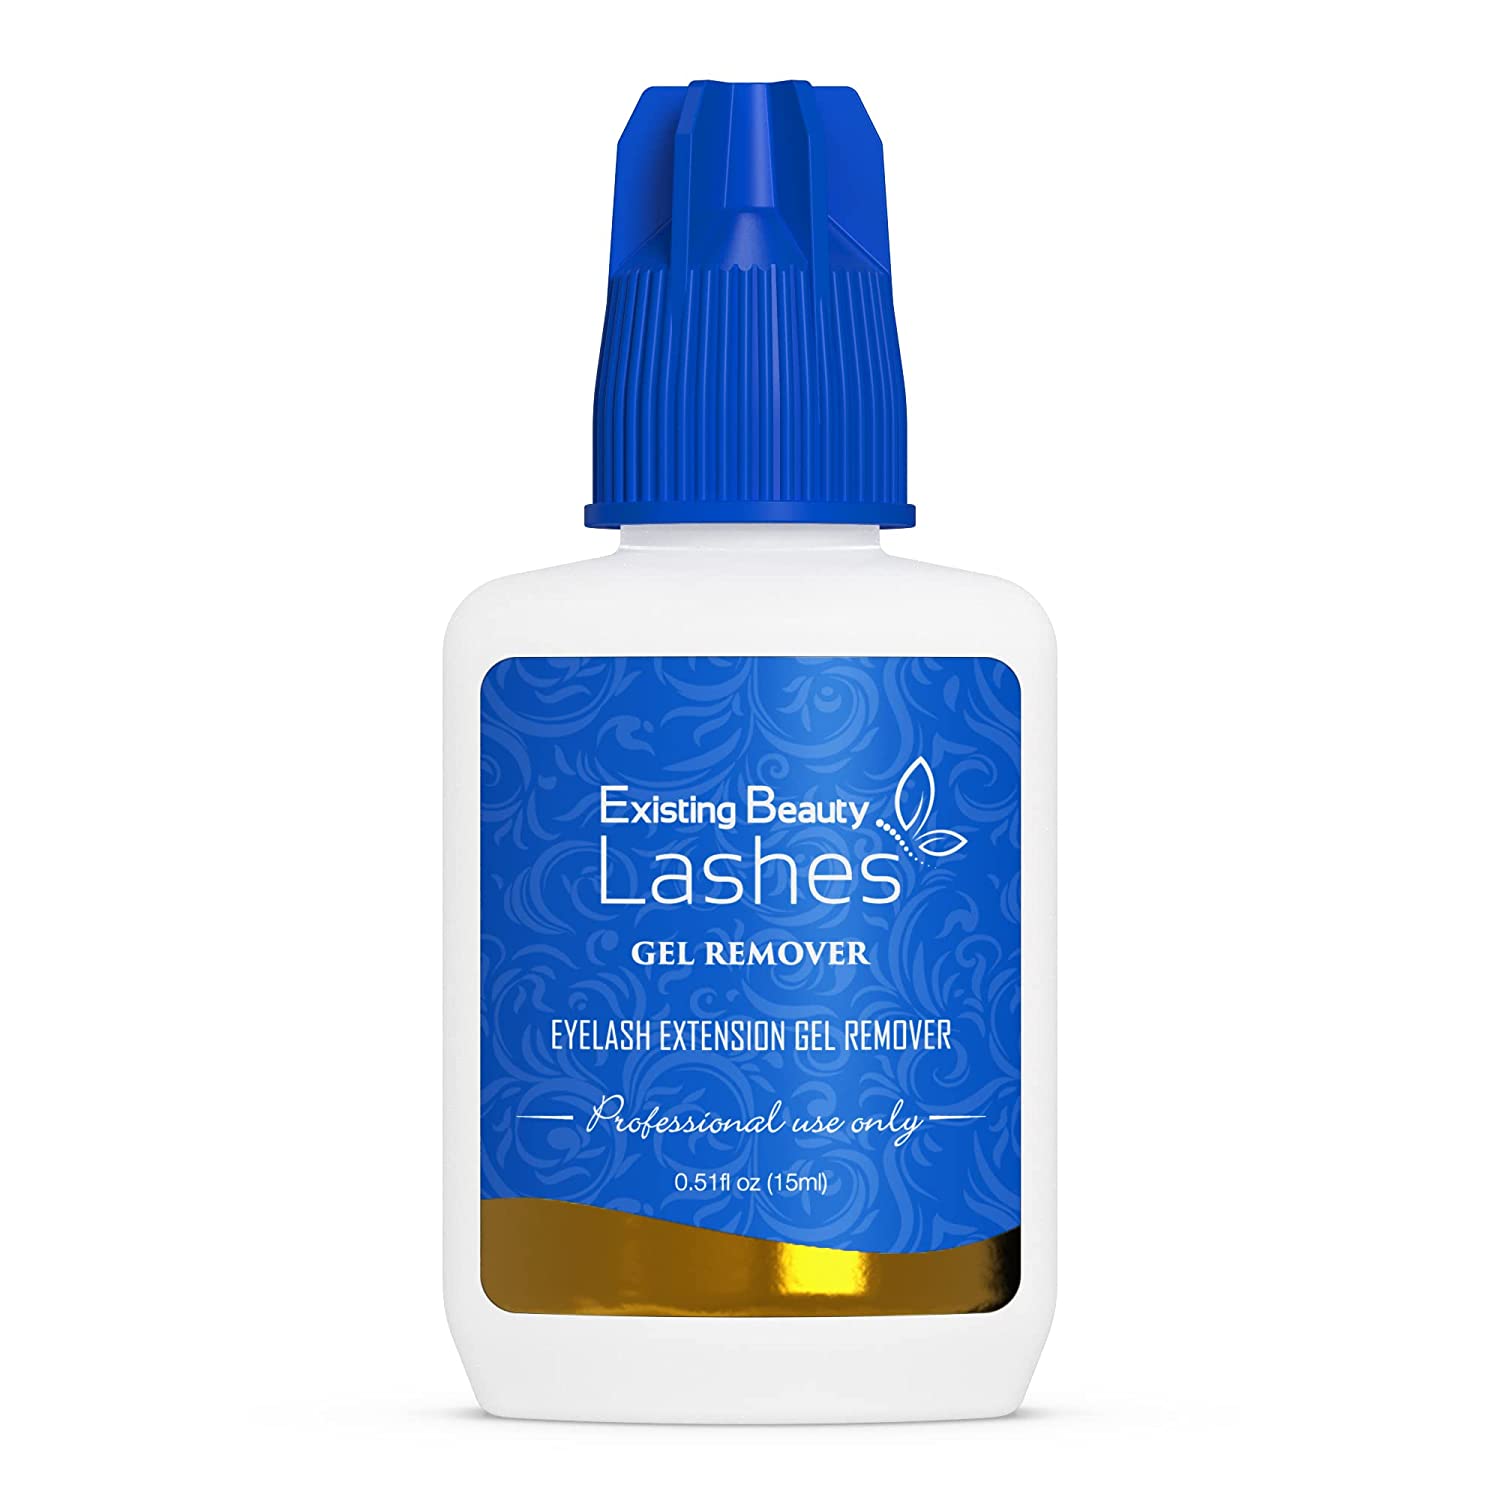 Existing Beauty Lashes Gel Remover